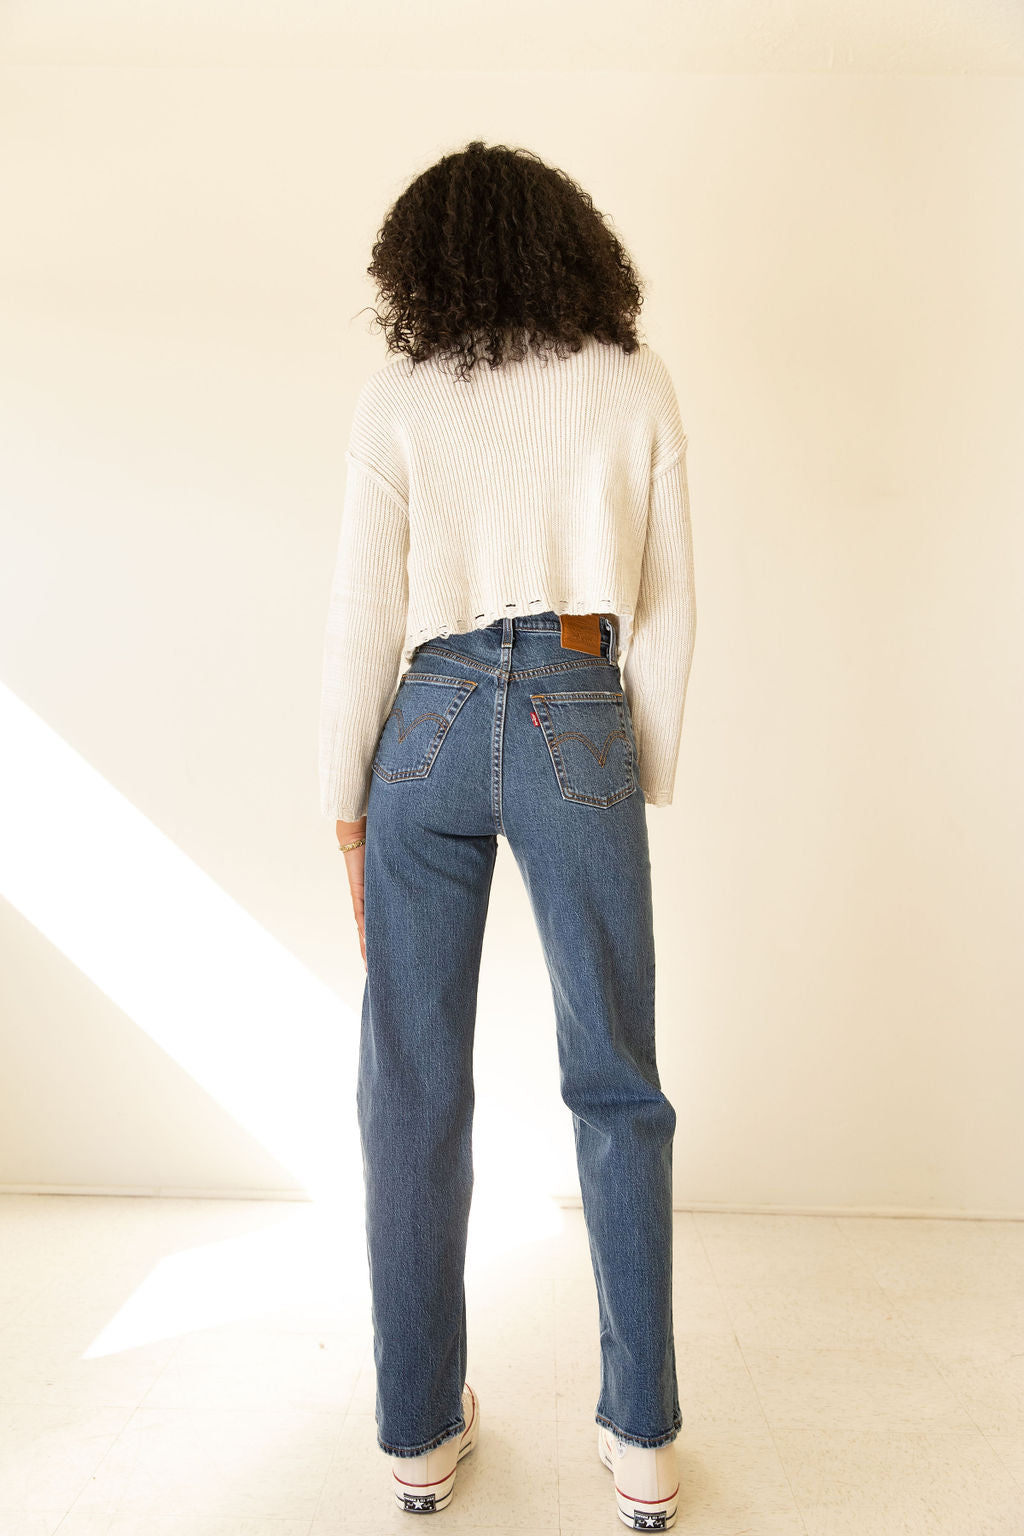 Valley View Ribcage Jeans by Levi's